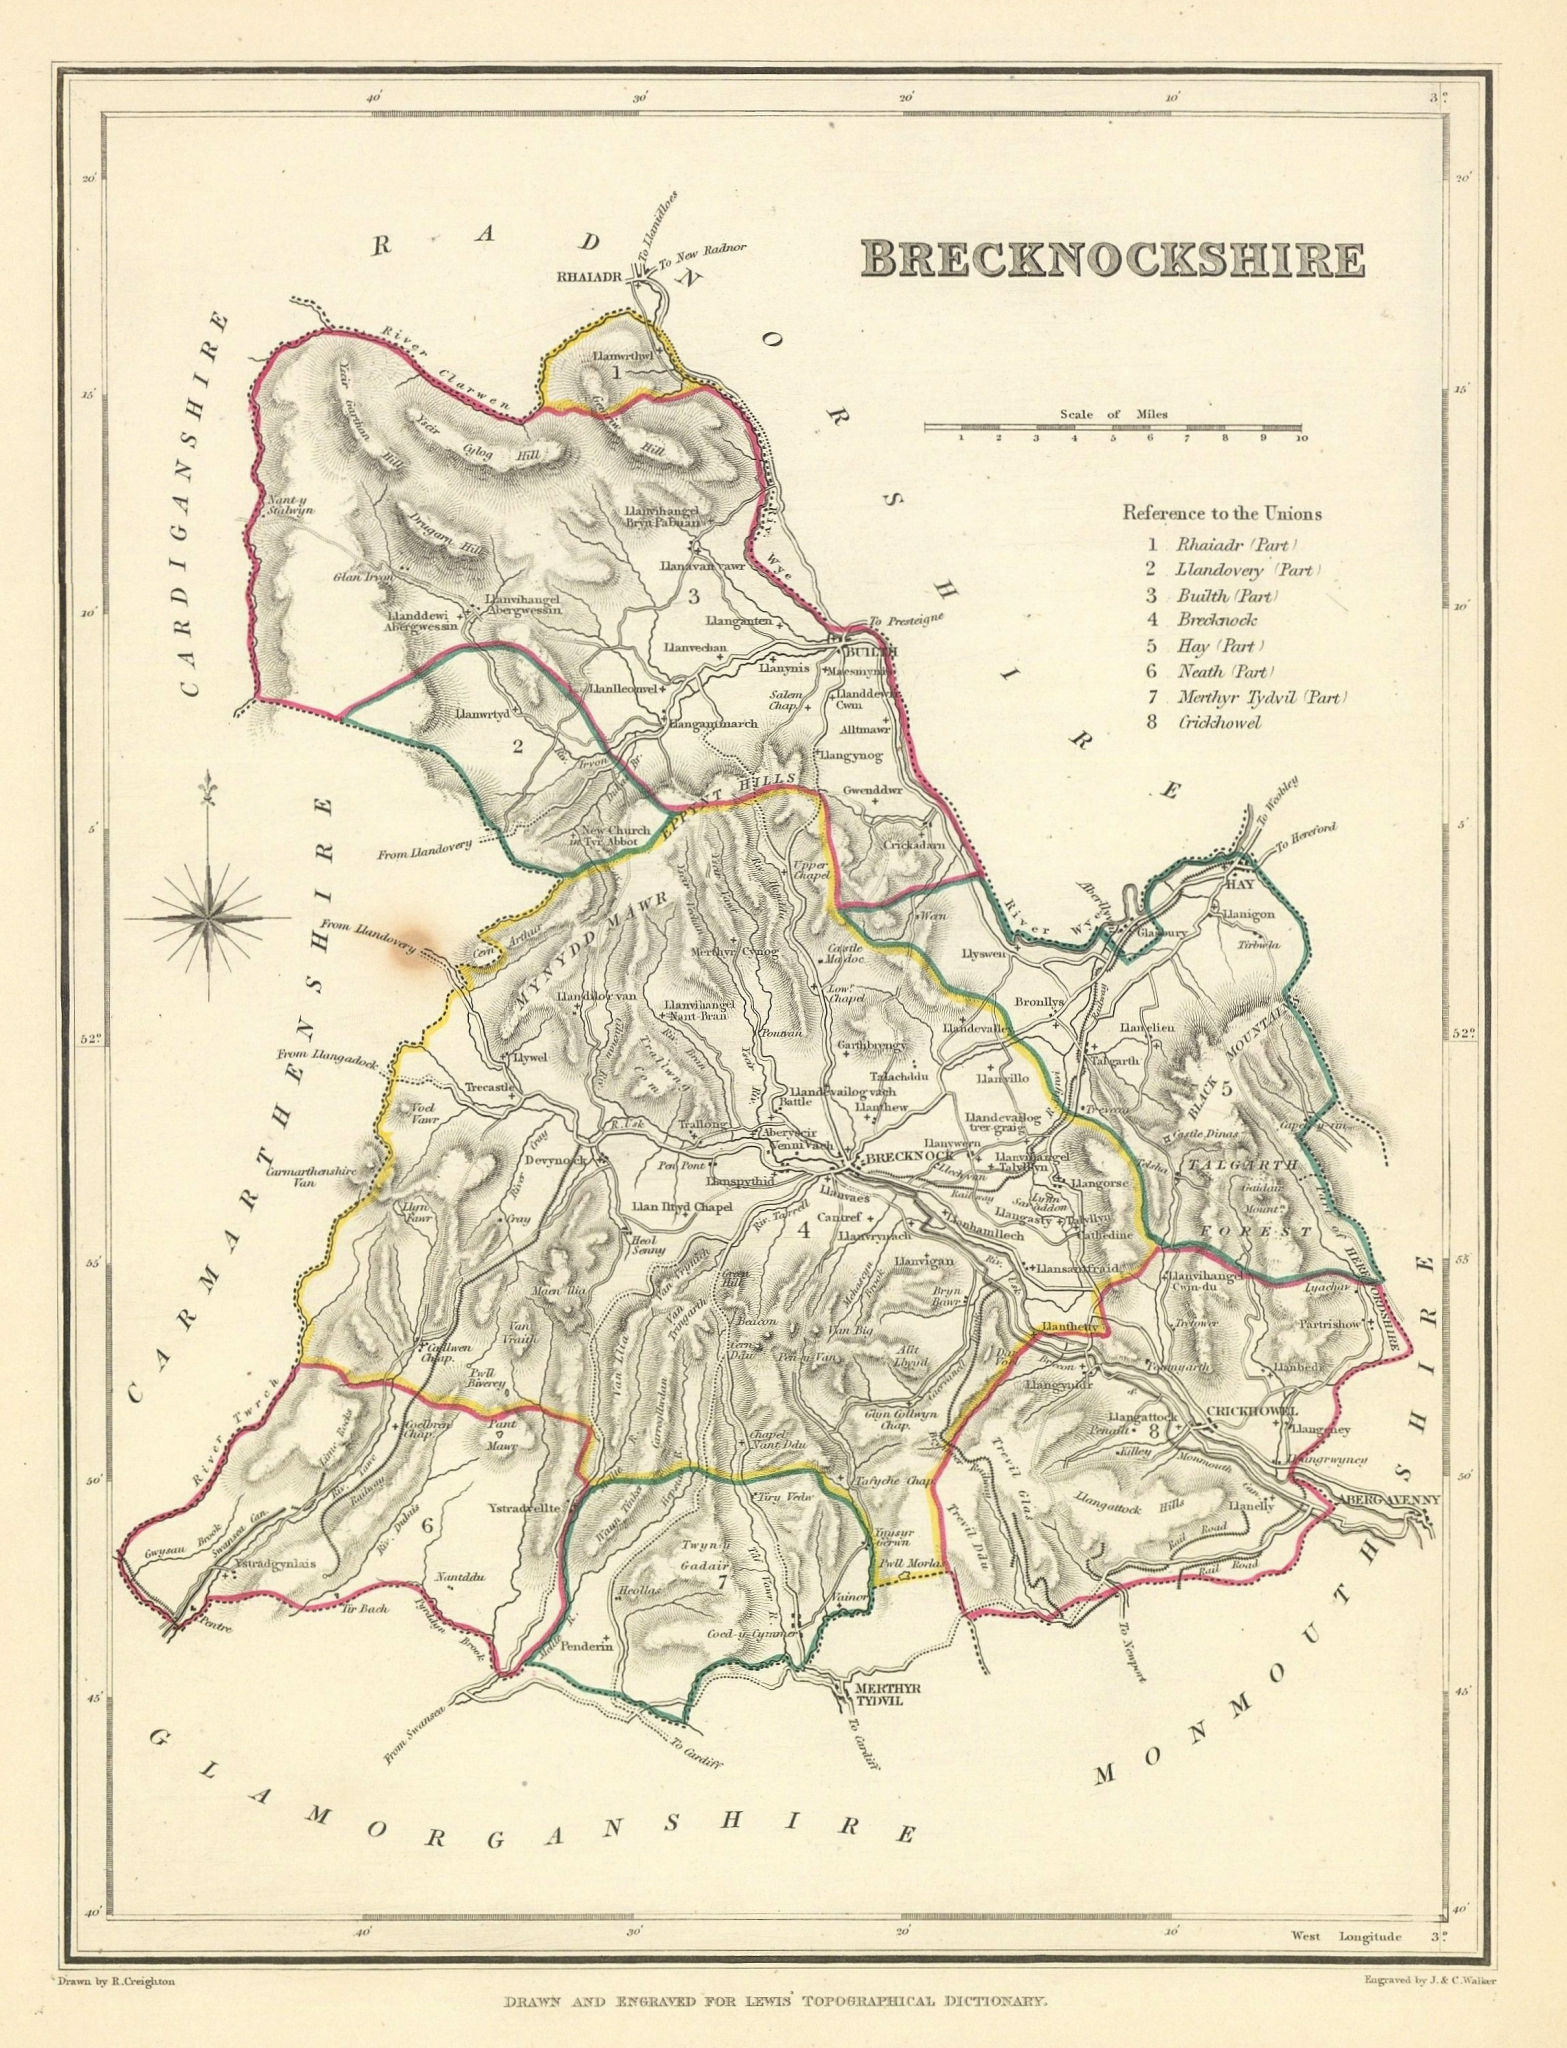 Associate Product Antique county map of BRECKNOCKSHIRE by Creighton & Walker for Lewis c1840